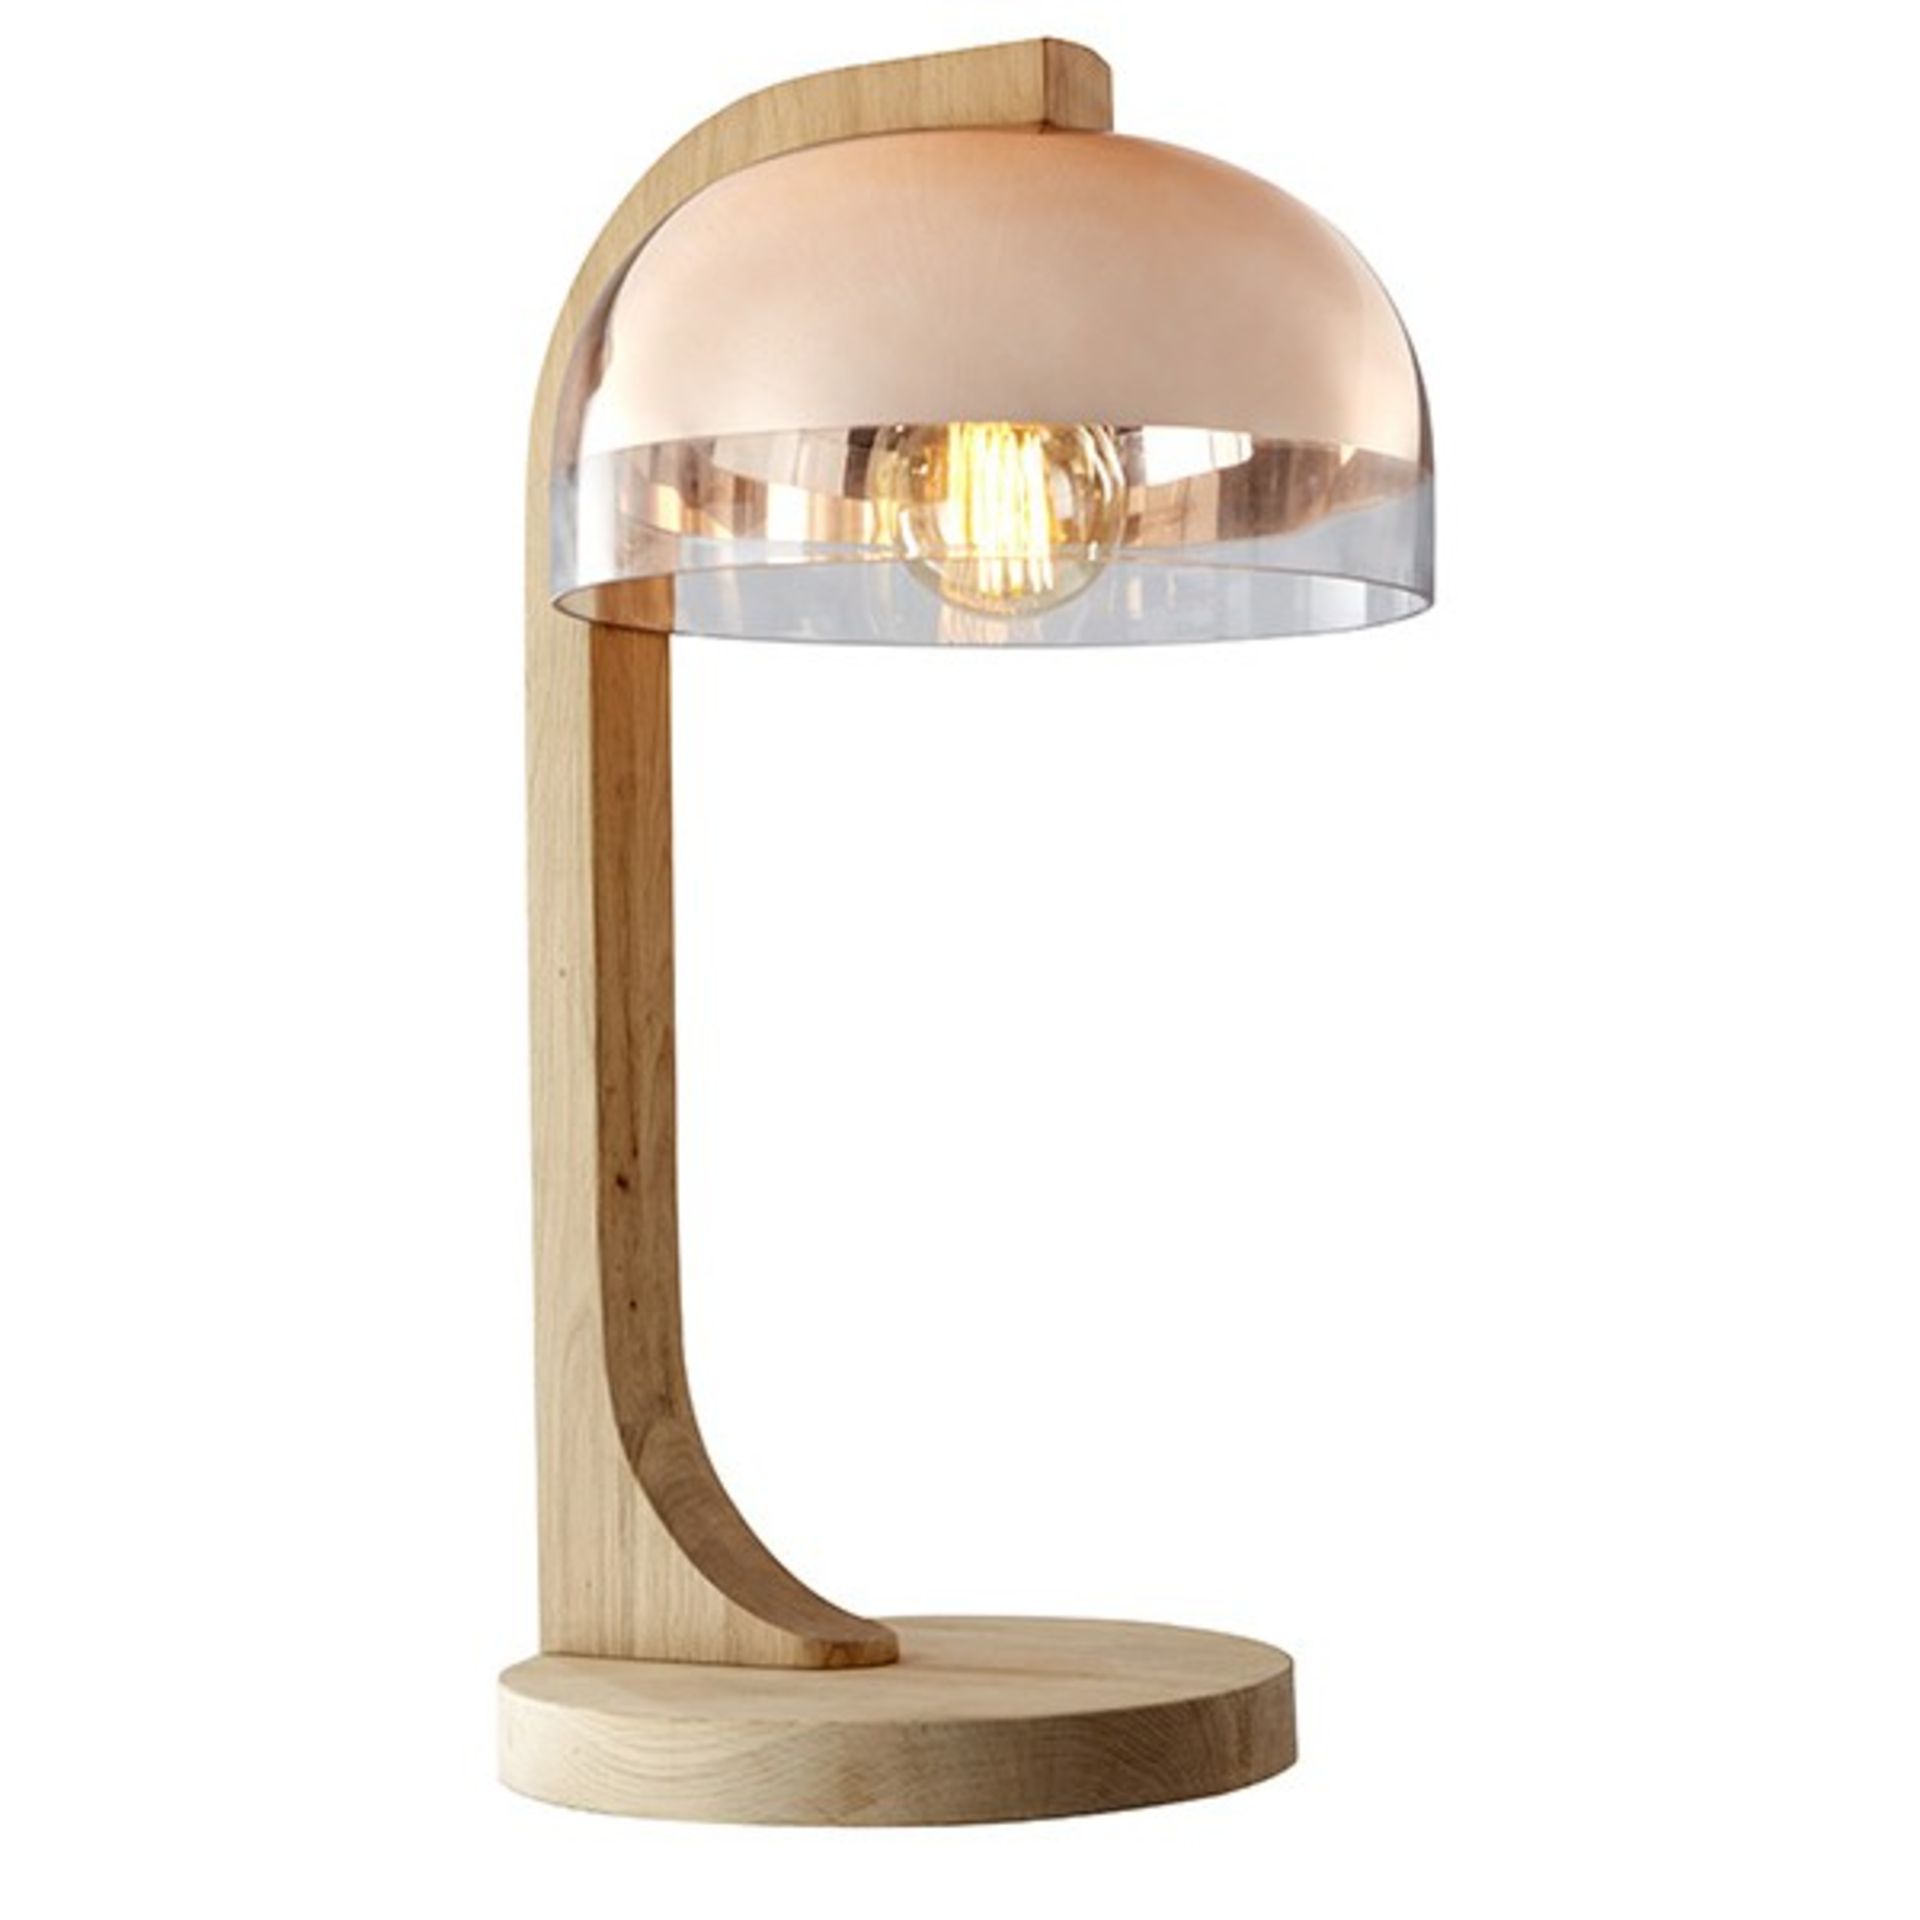 Bleu Nature L253 Cocoon Table Lamp Glass with copper metalization and raw oak (UK) 39 x 35 x 68cm